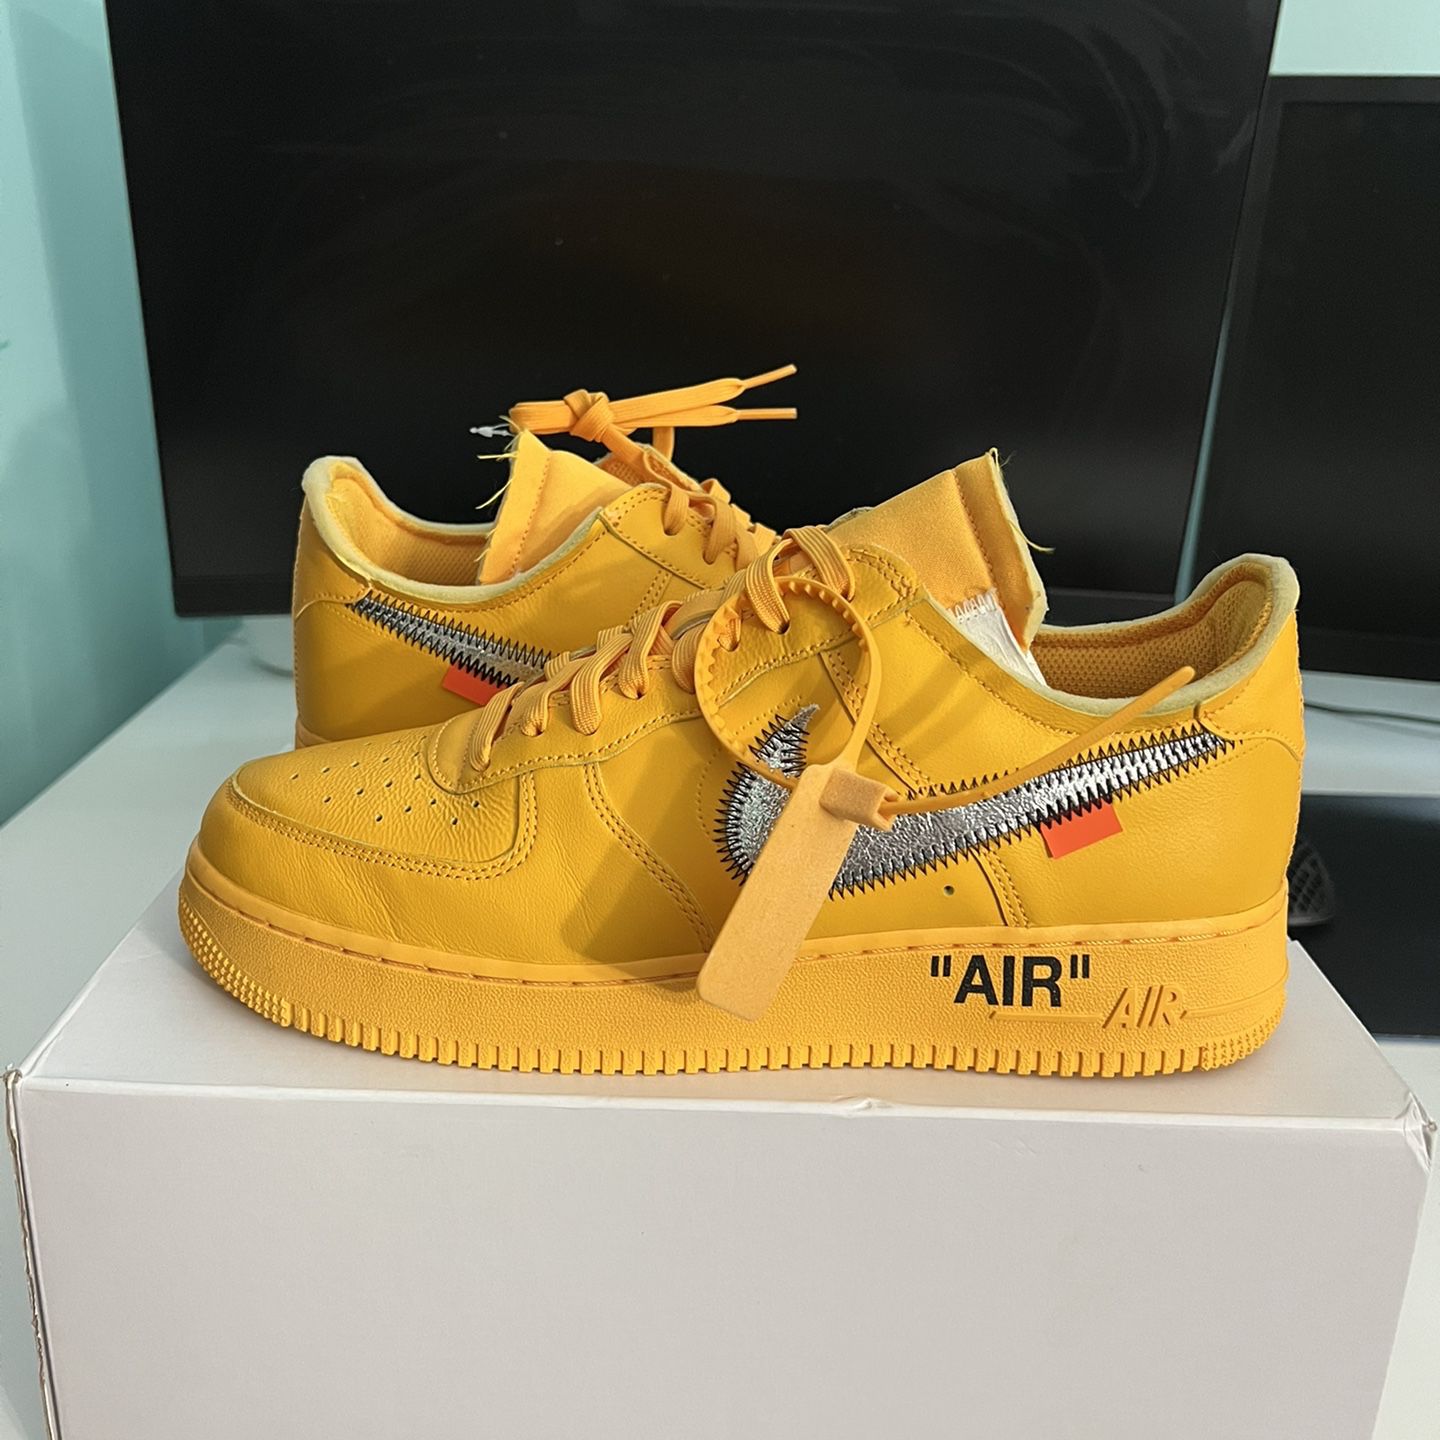 Nike Air Force 1 Low Off White University Gold Available in store now! Size  10.5 Worn 1x - $1700